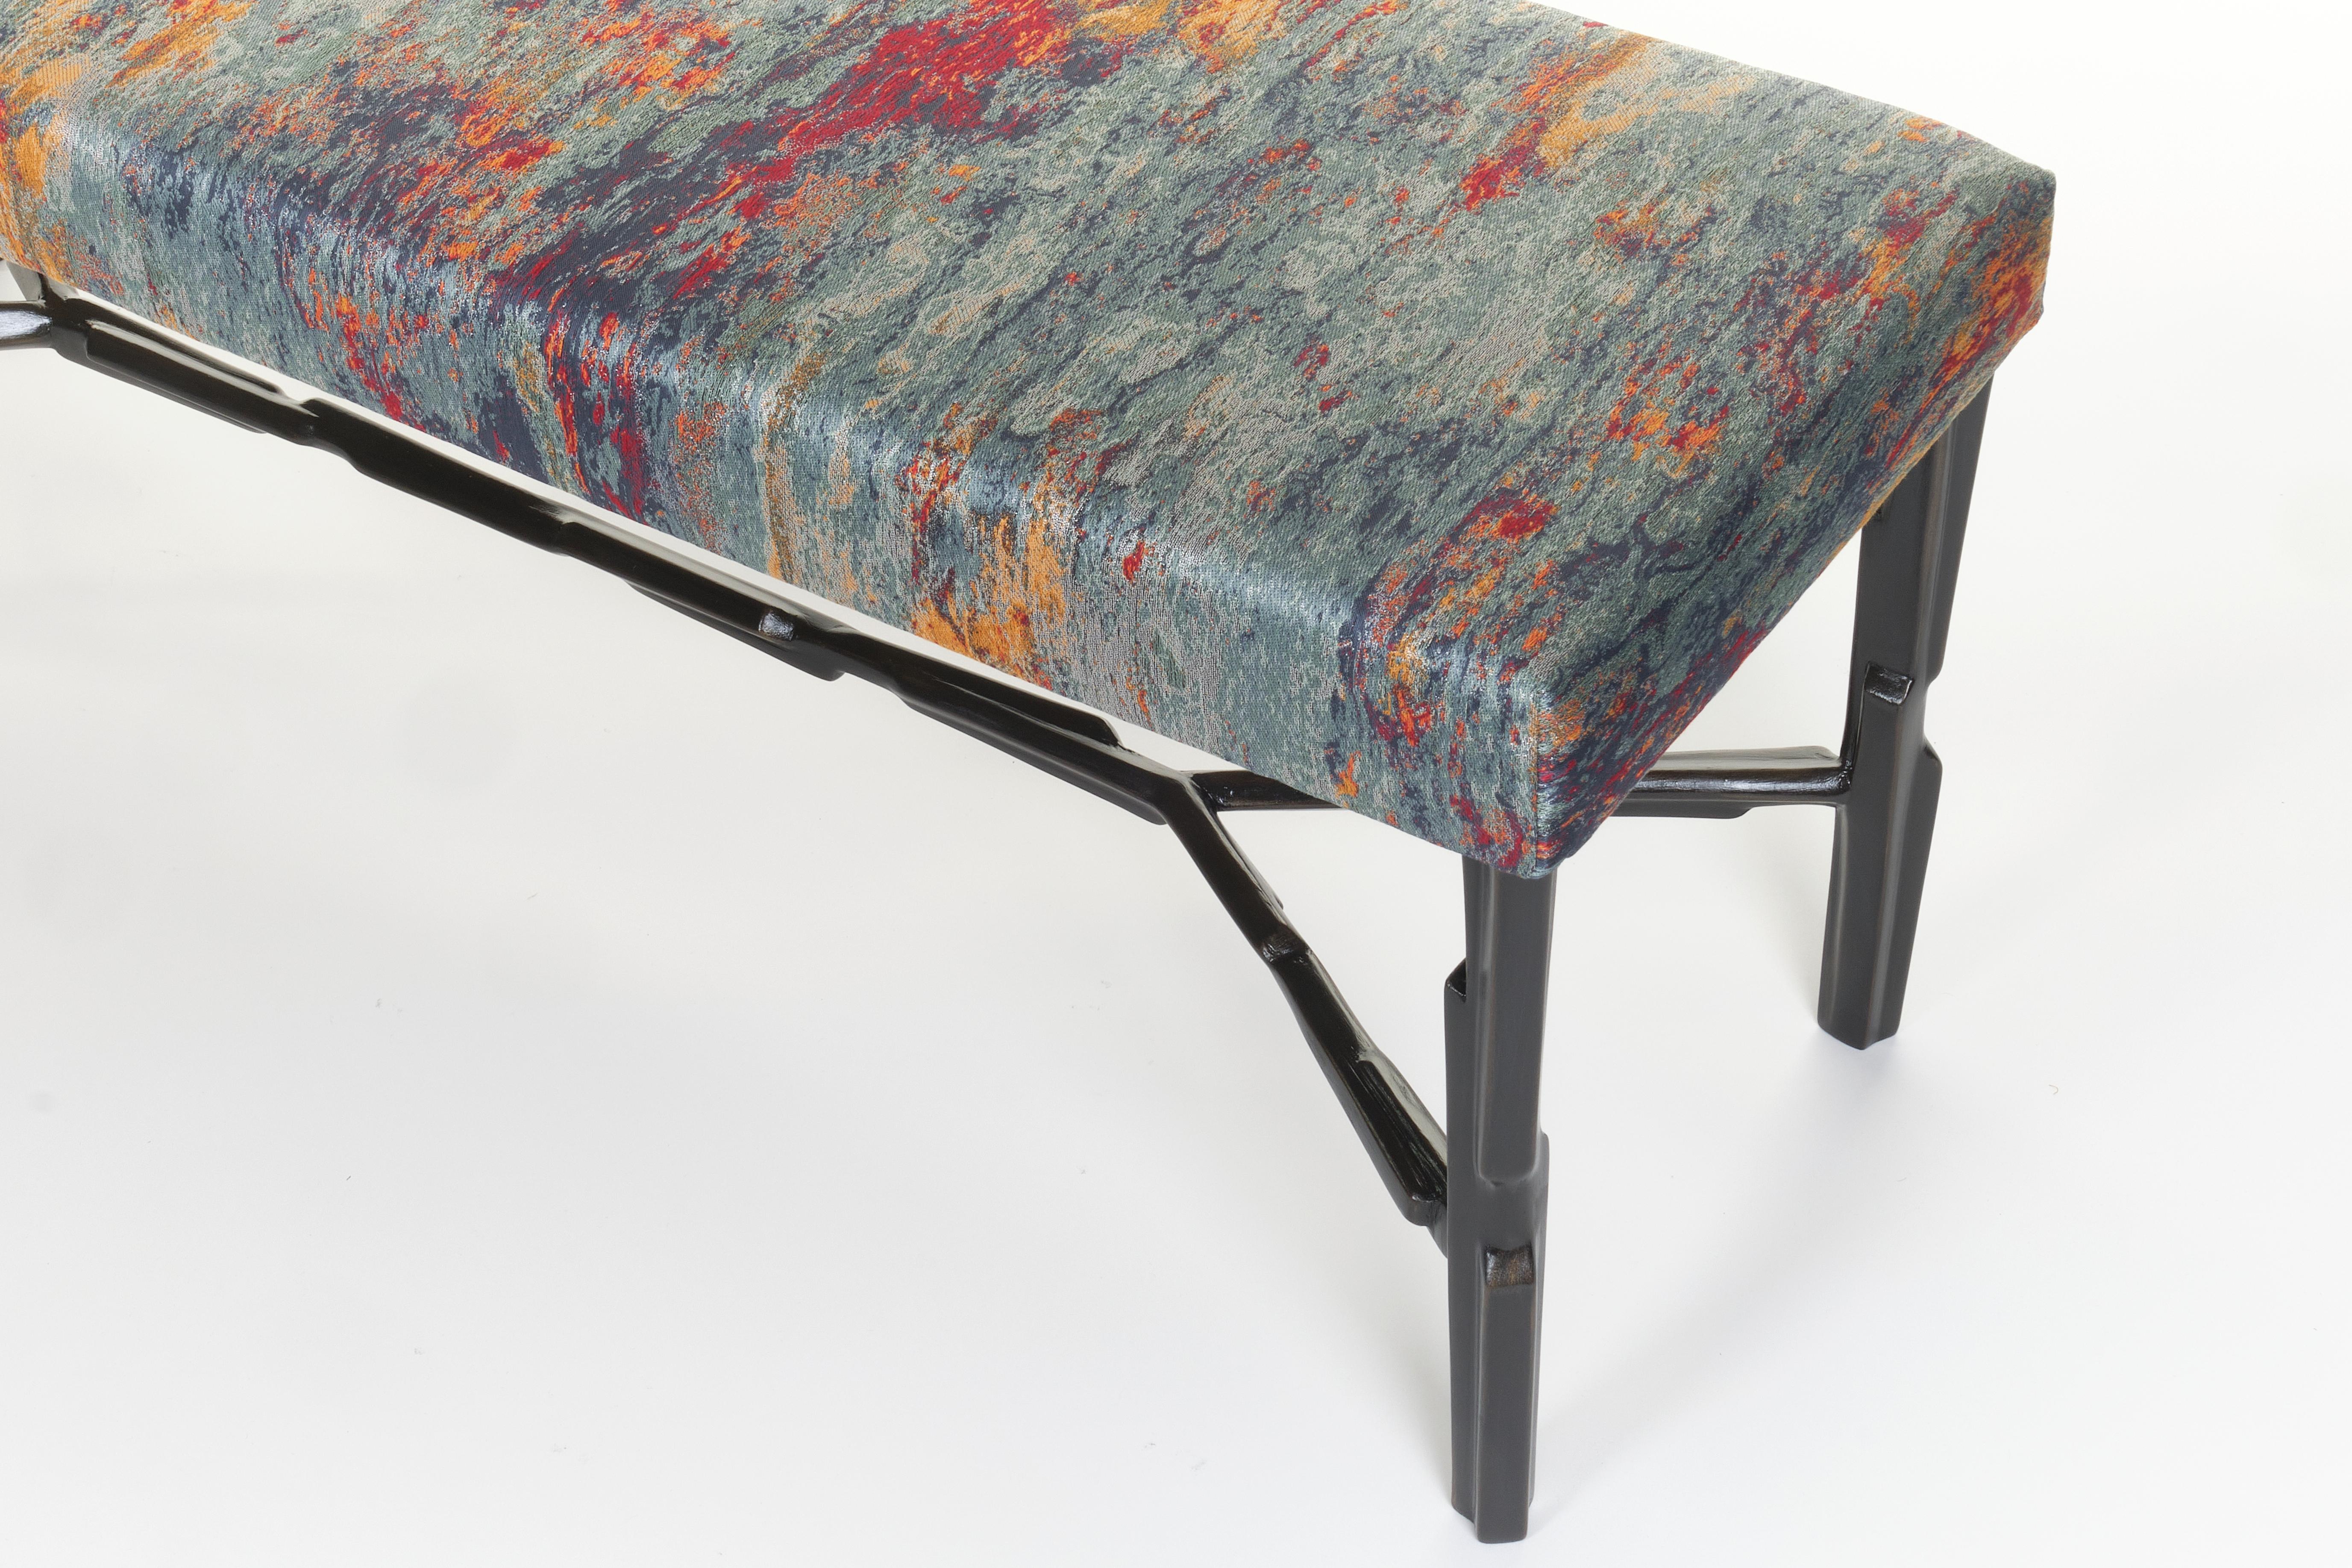 German Modern Linea Bench No.2, Bronze Plaster Finish with Second Firing 1 seat pad For Sale